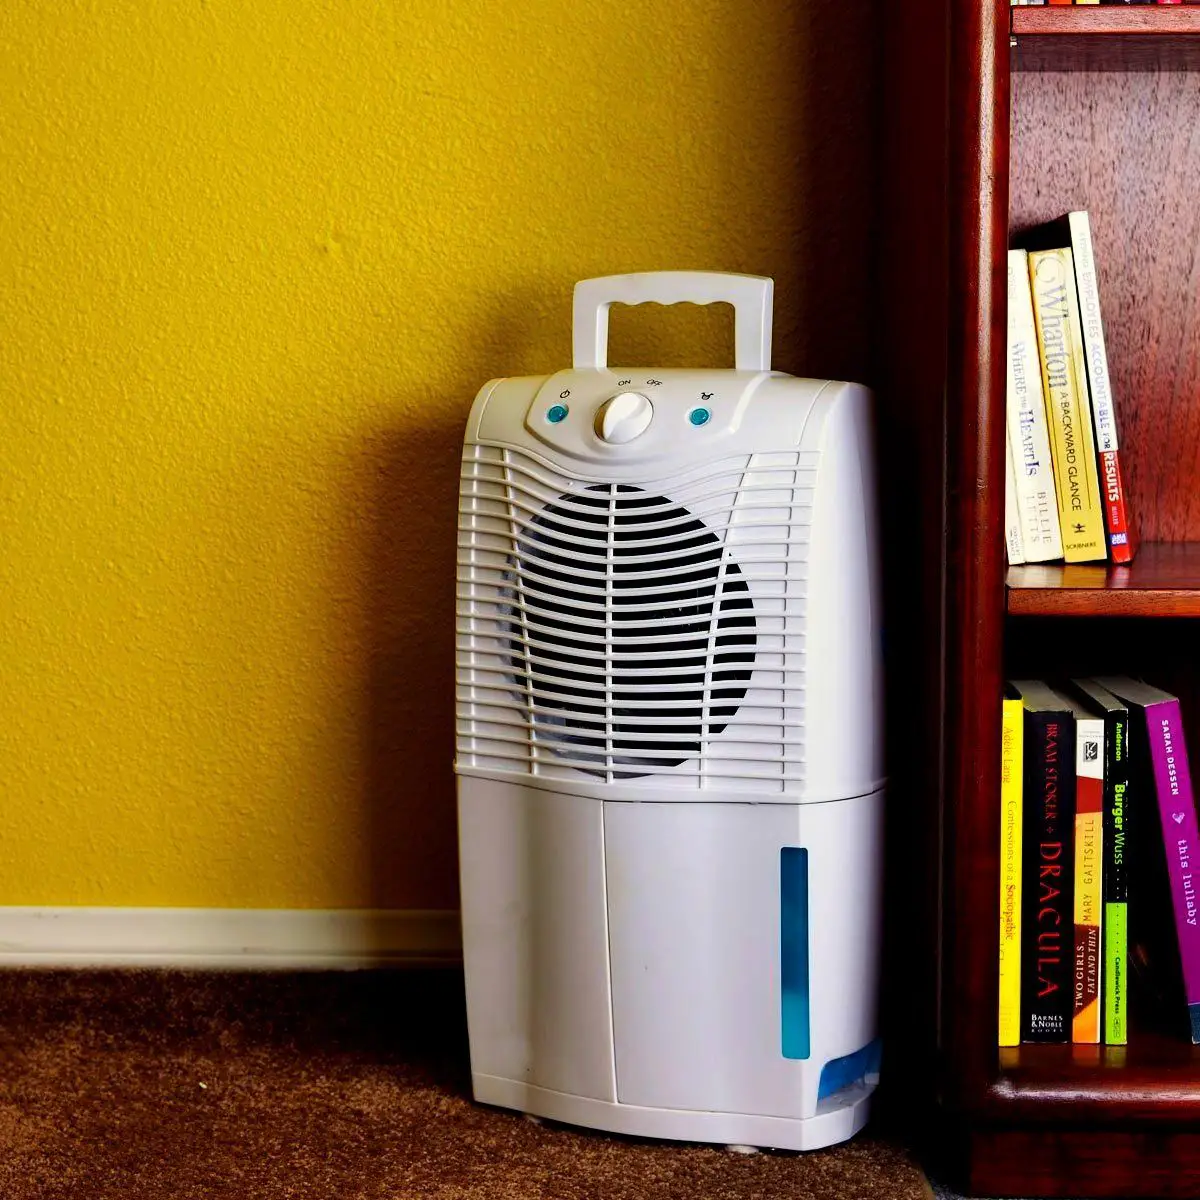 How To Clean A Dehumidifier Of Mold